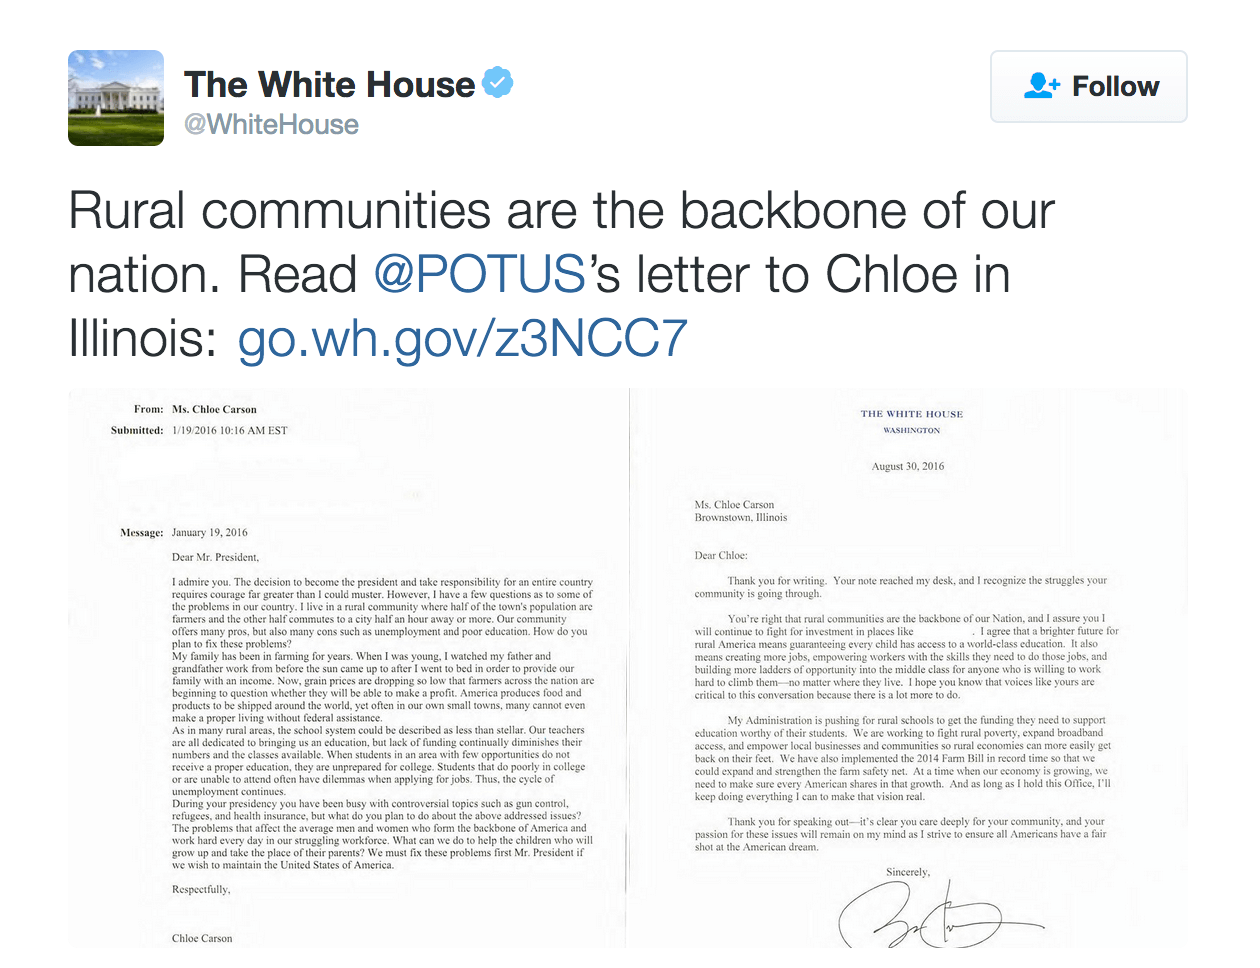 Rural communities are the backbone of our nation. Read @POTUS’s letter to Chloe in Illinois: http://go.wh.gov/z3NCC7 